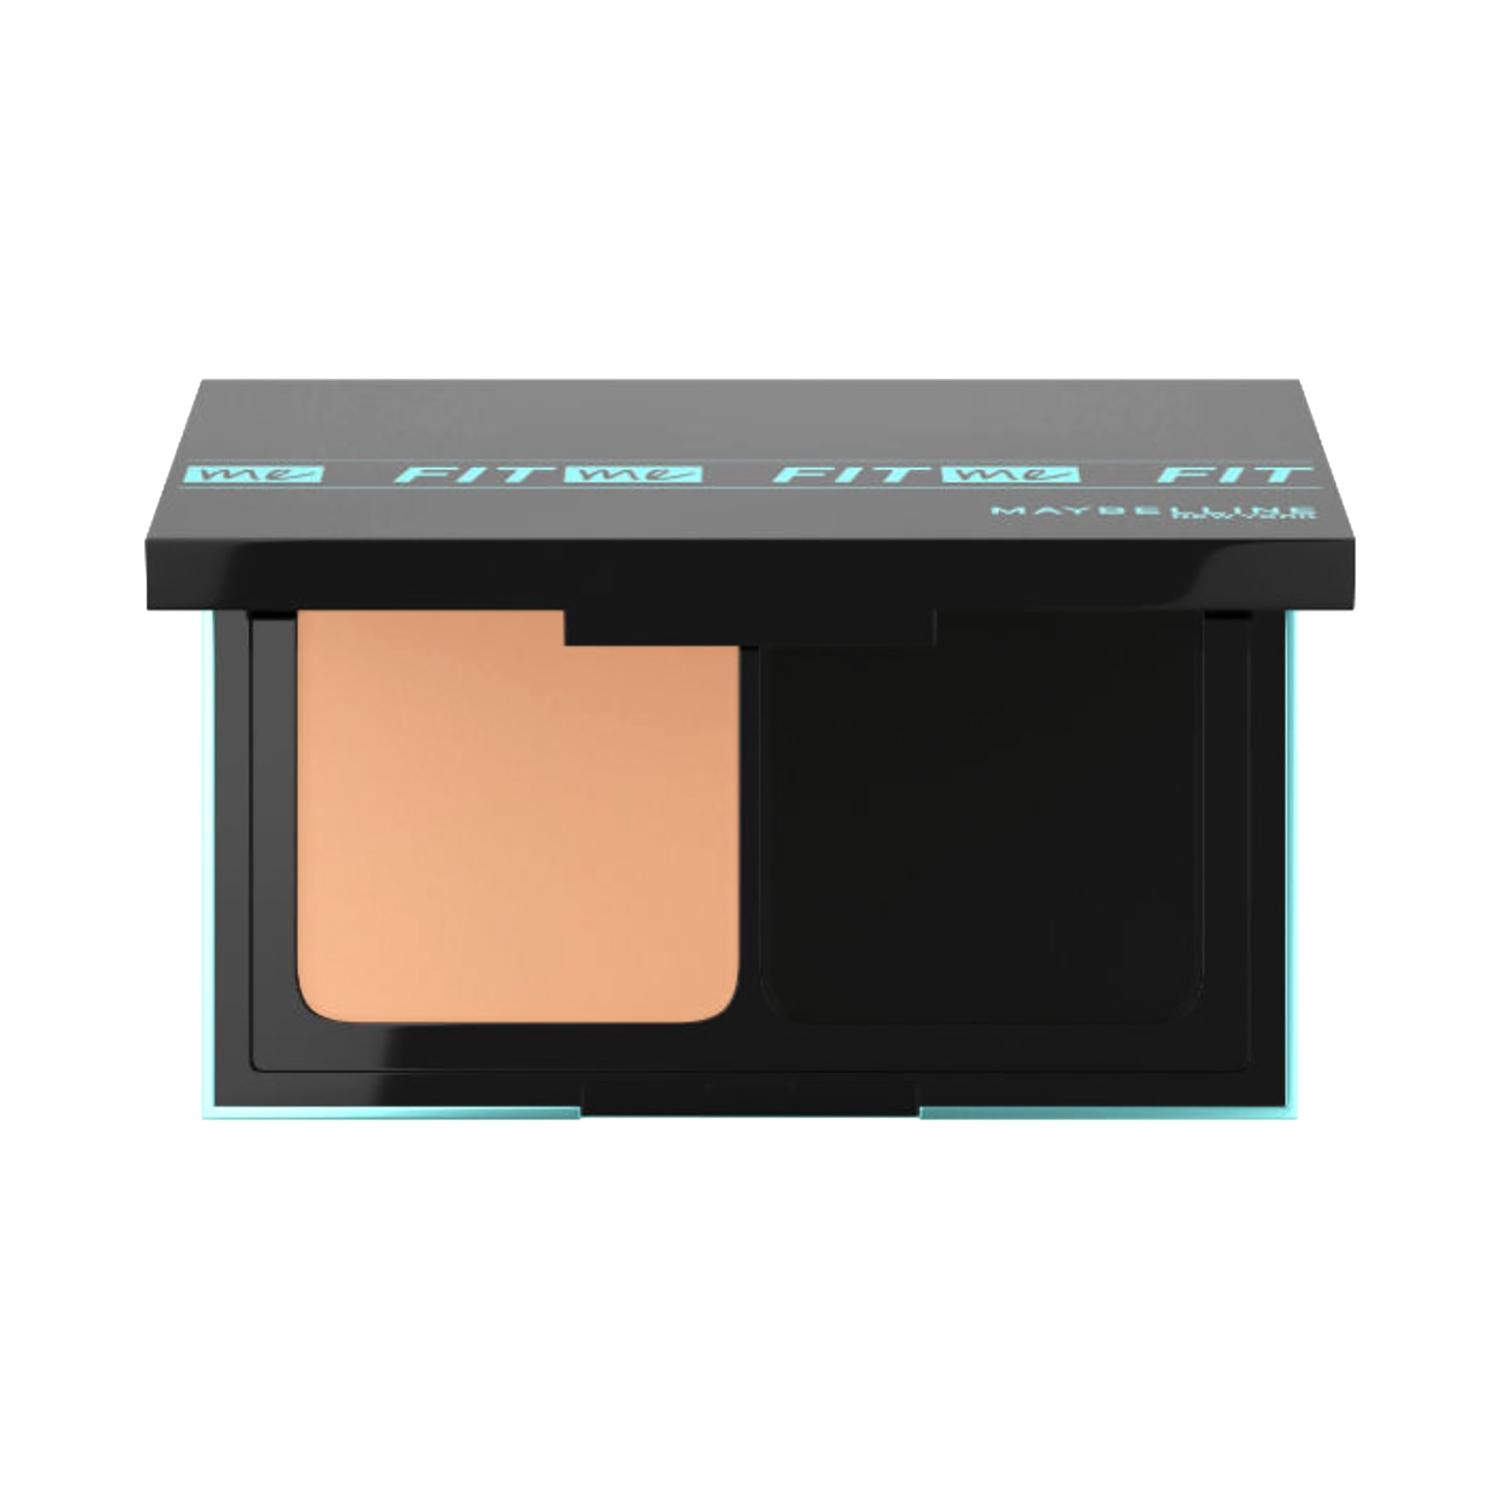 maybelline new york fit me ultimate powder foundation - shade 230 (9g)